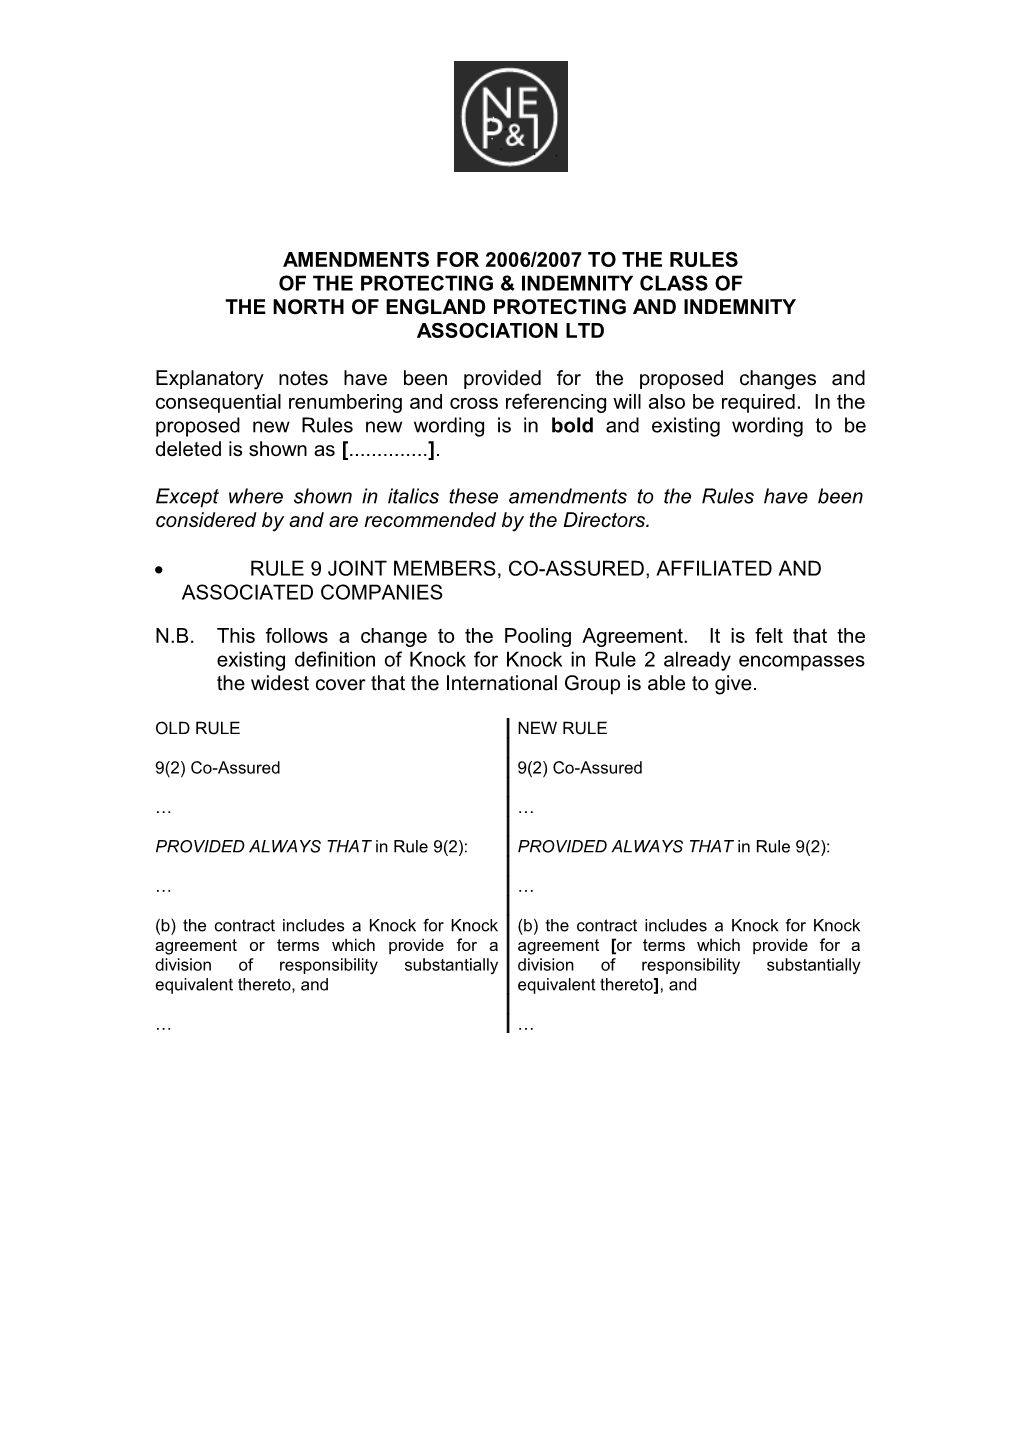 Amendments for 2006/2007 to the Rules